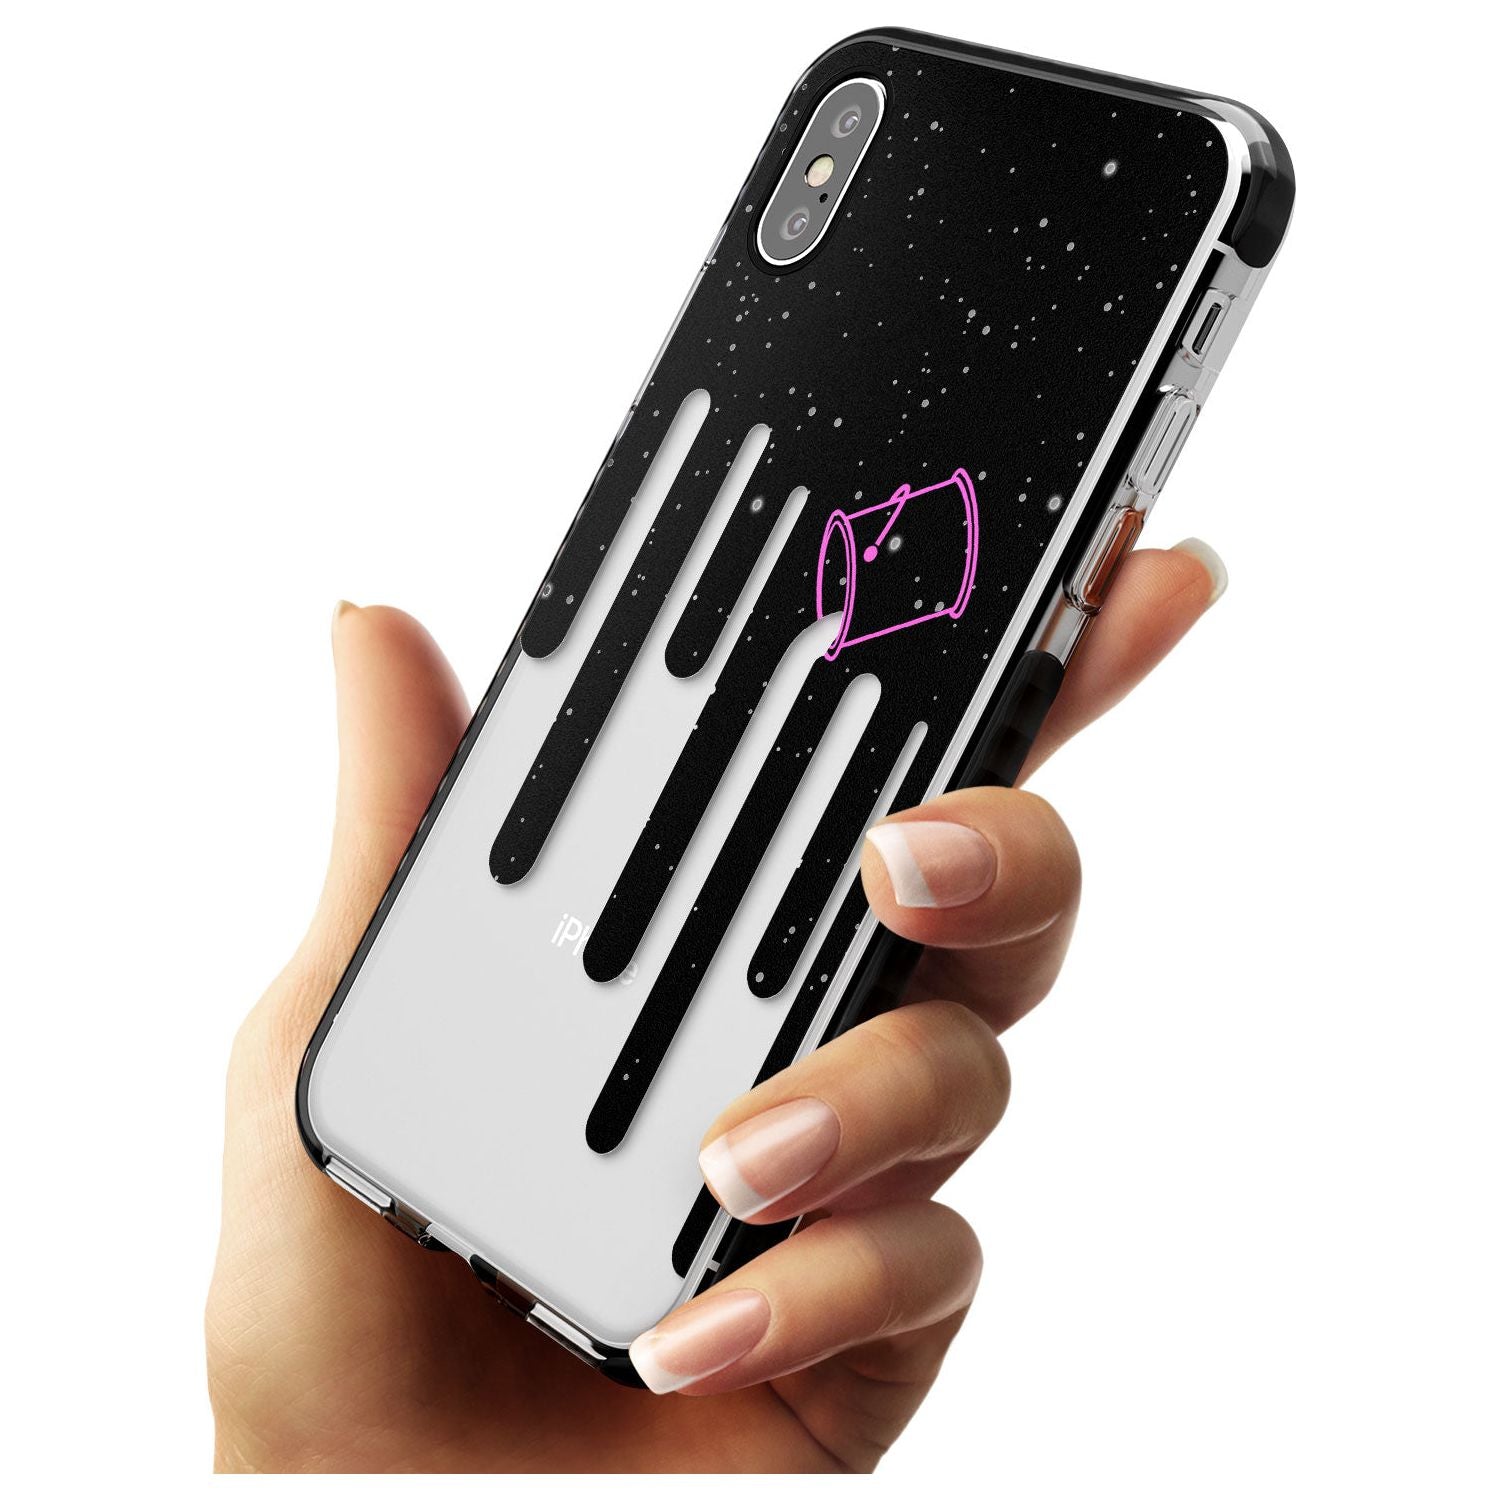 Space Bucket Pink Fade Impact Phone Case for iPhone X XS Max XR